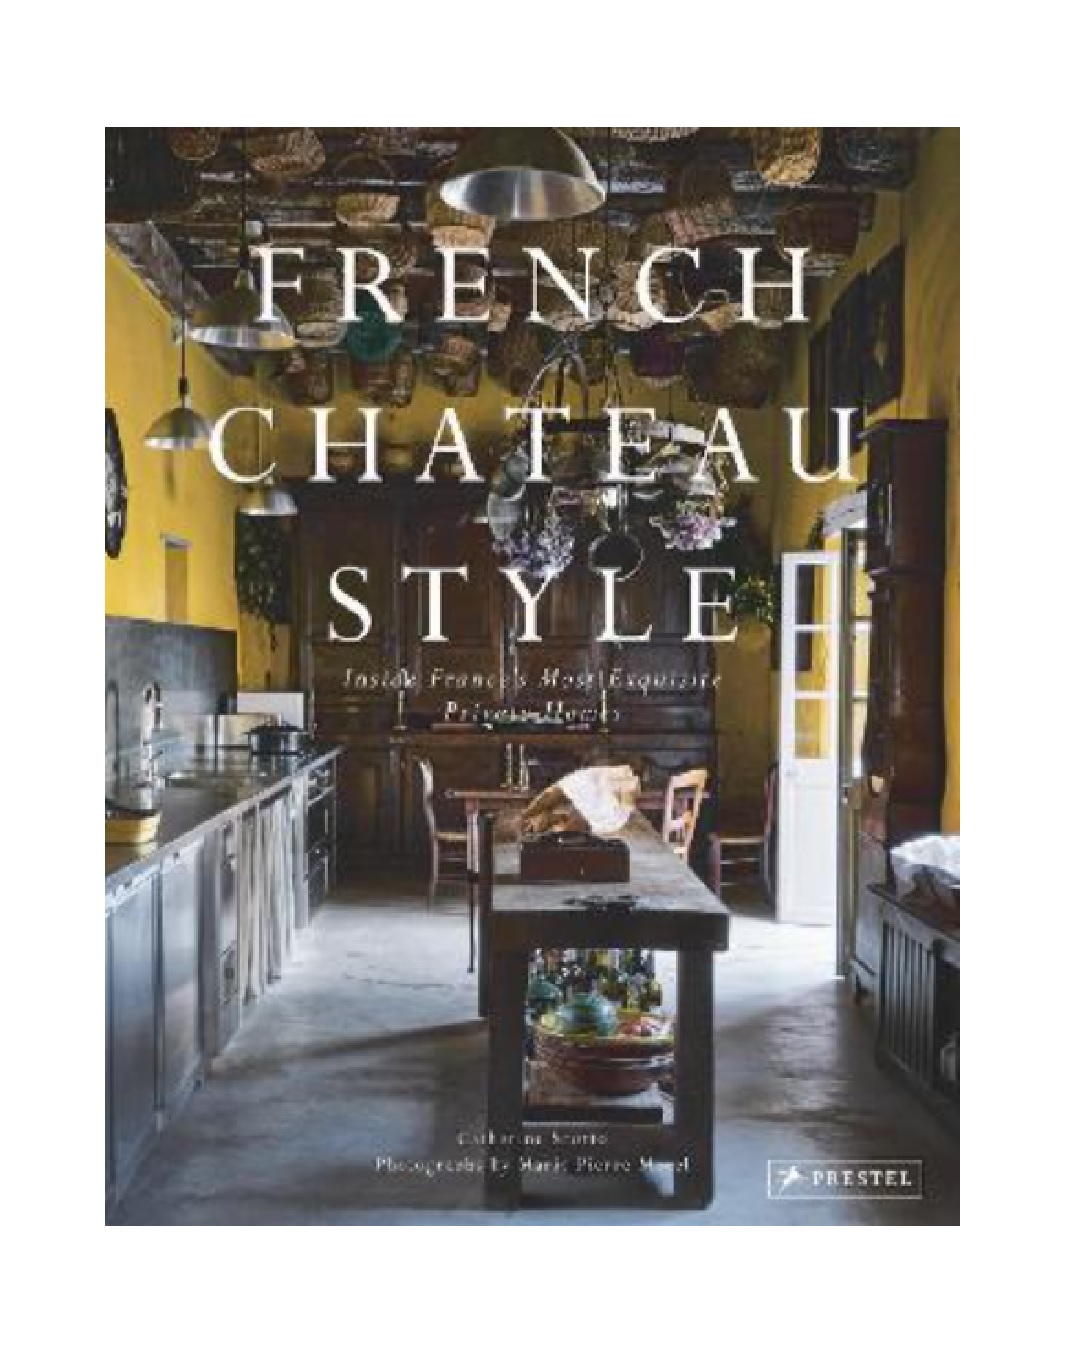 French Chateau Style book